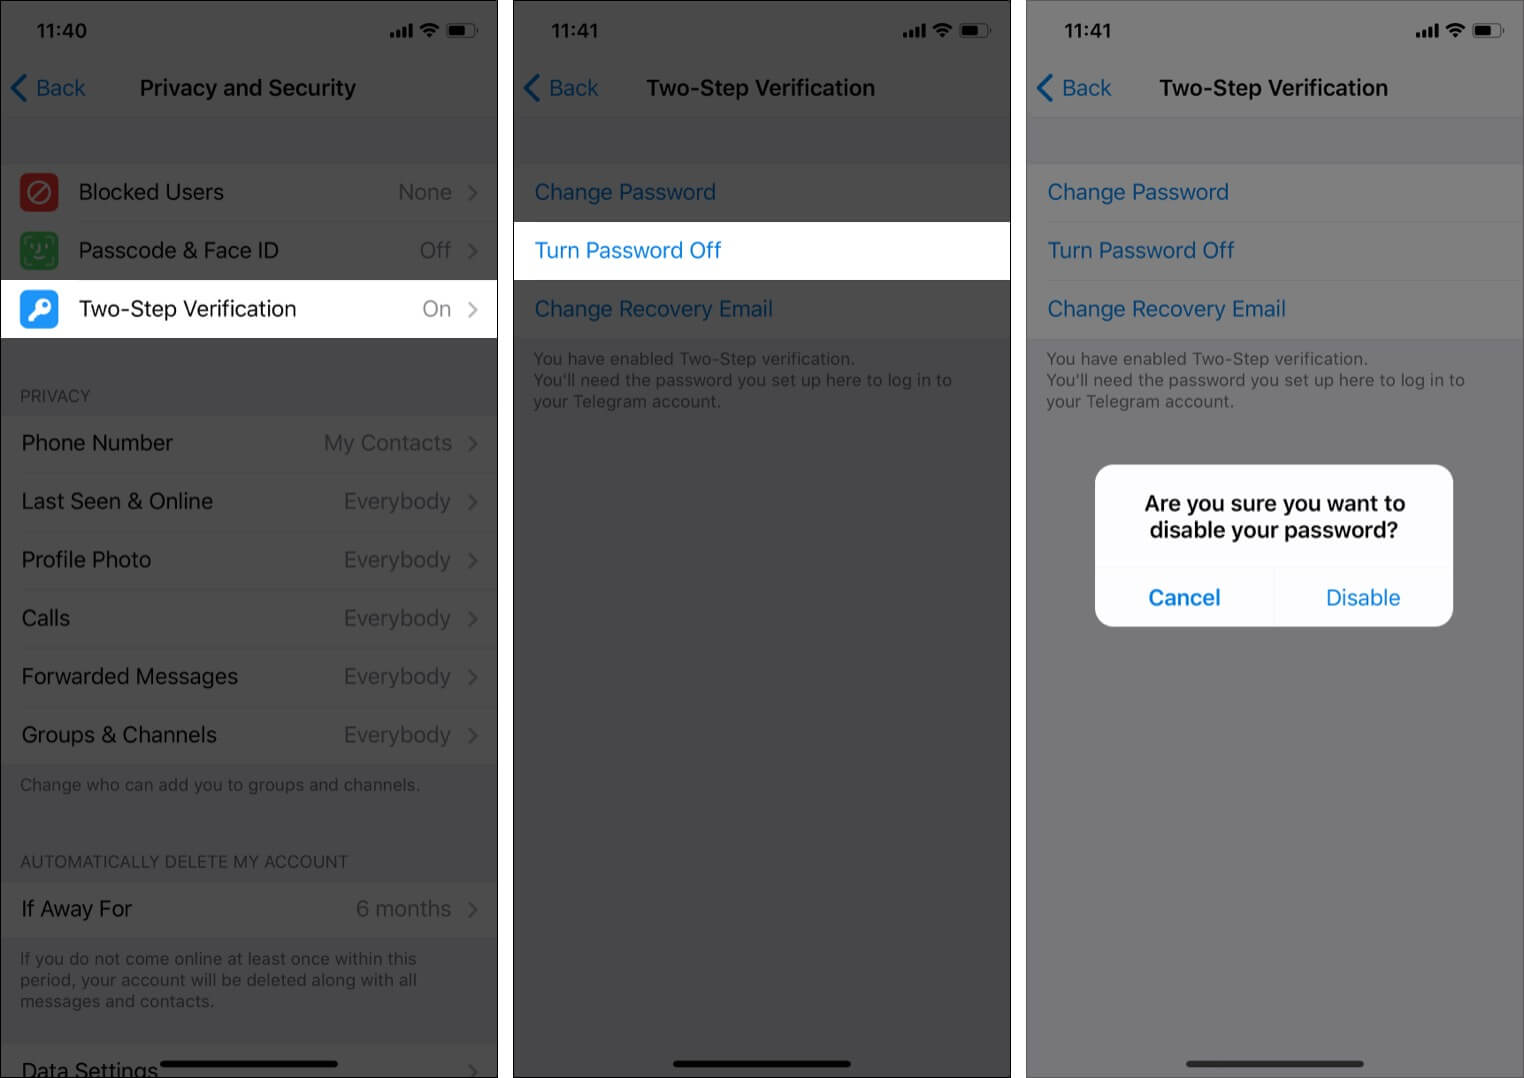 How to Disable 2-Step Verification in Telegram on iPhone